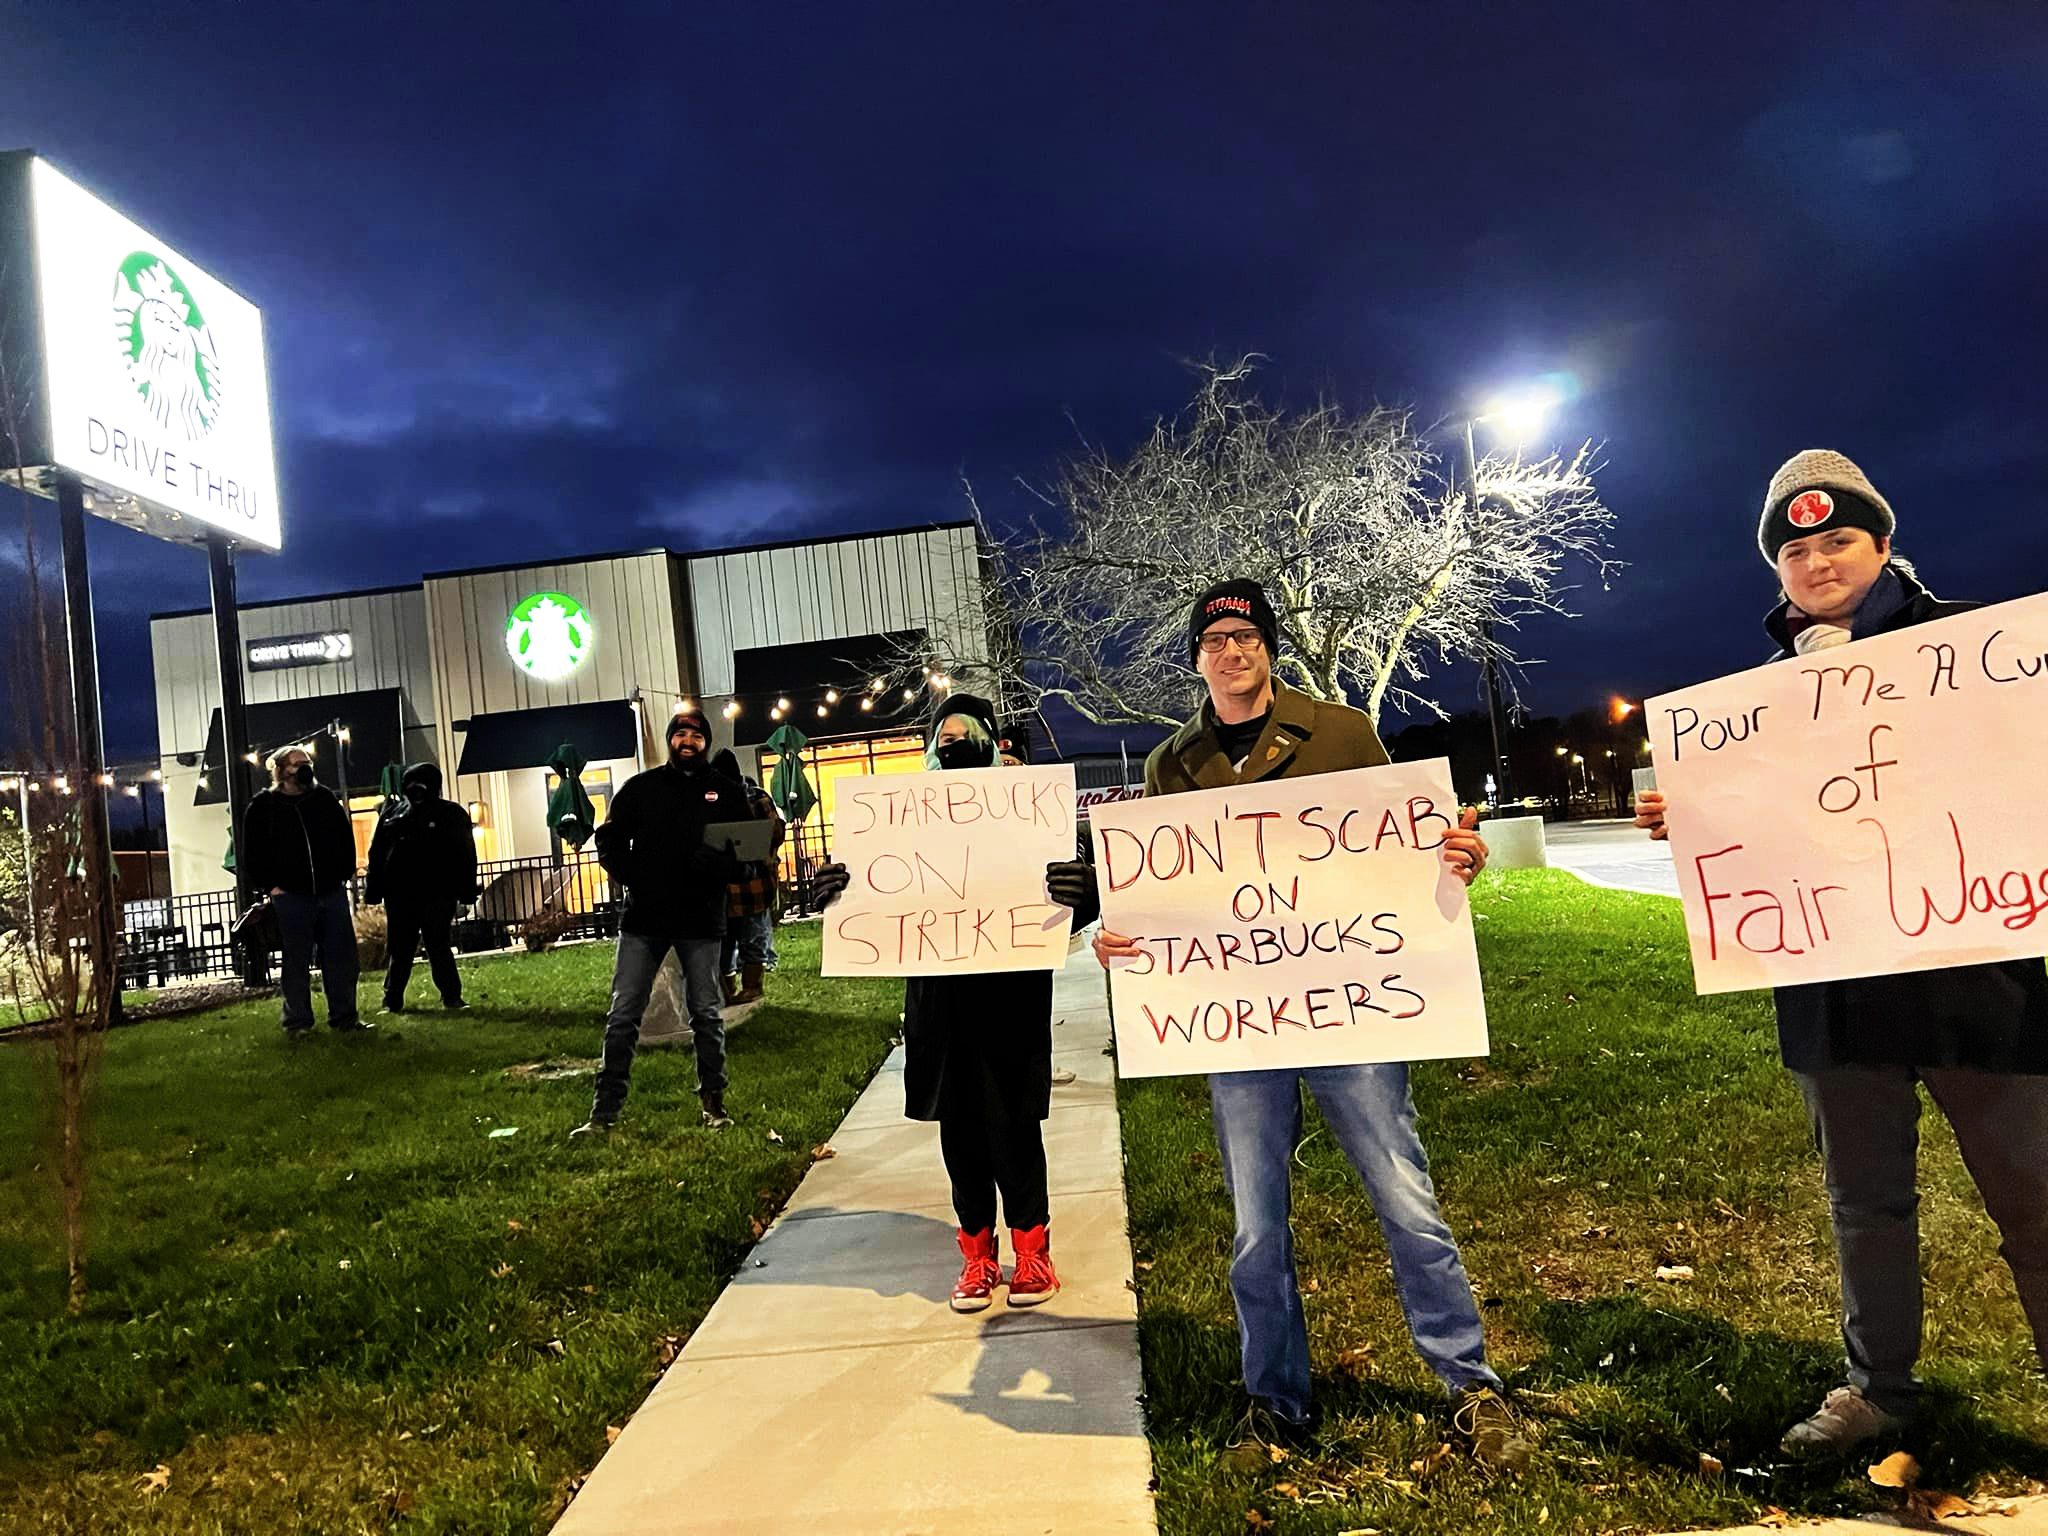 Picketers stand scattered across the lawn outside a Starbucks drive-through. One of their signs reads, “Pour Me A Cup of Fair Wages.”